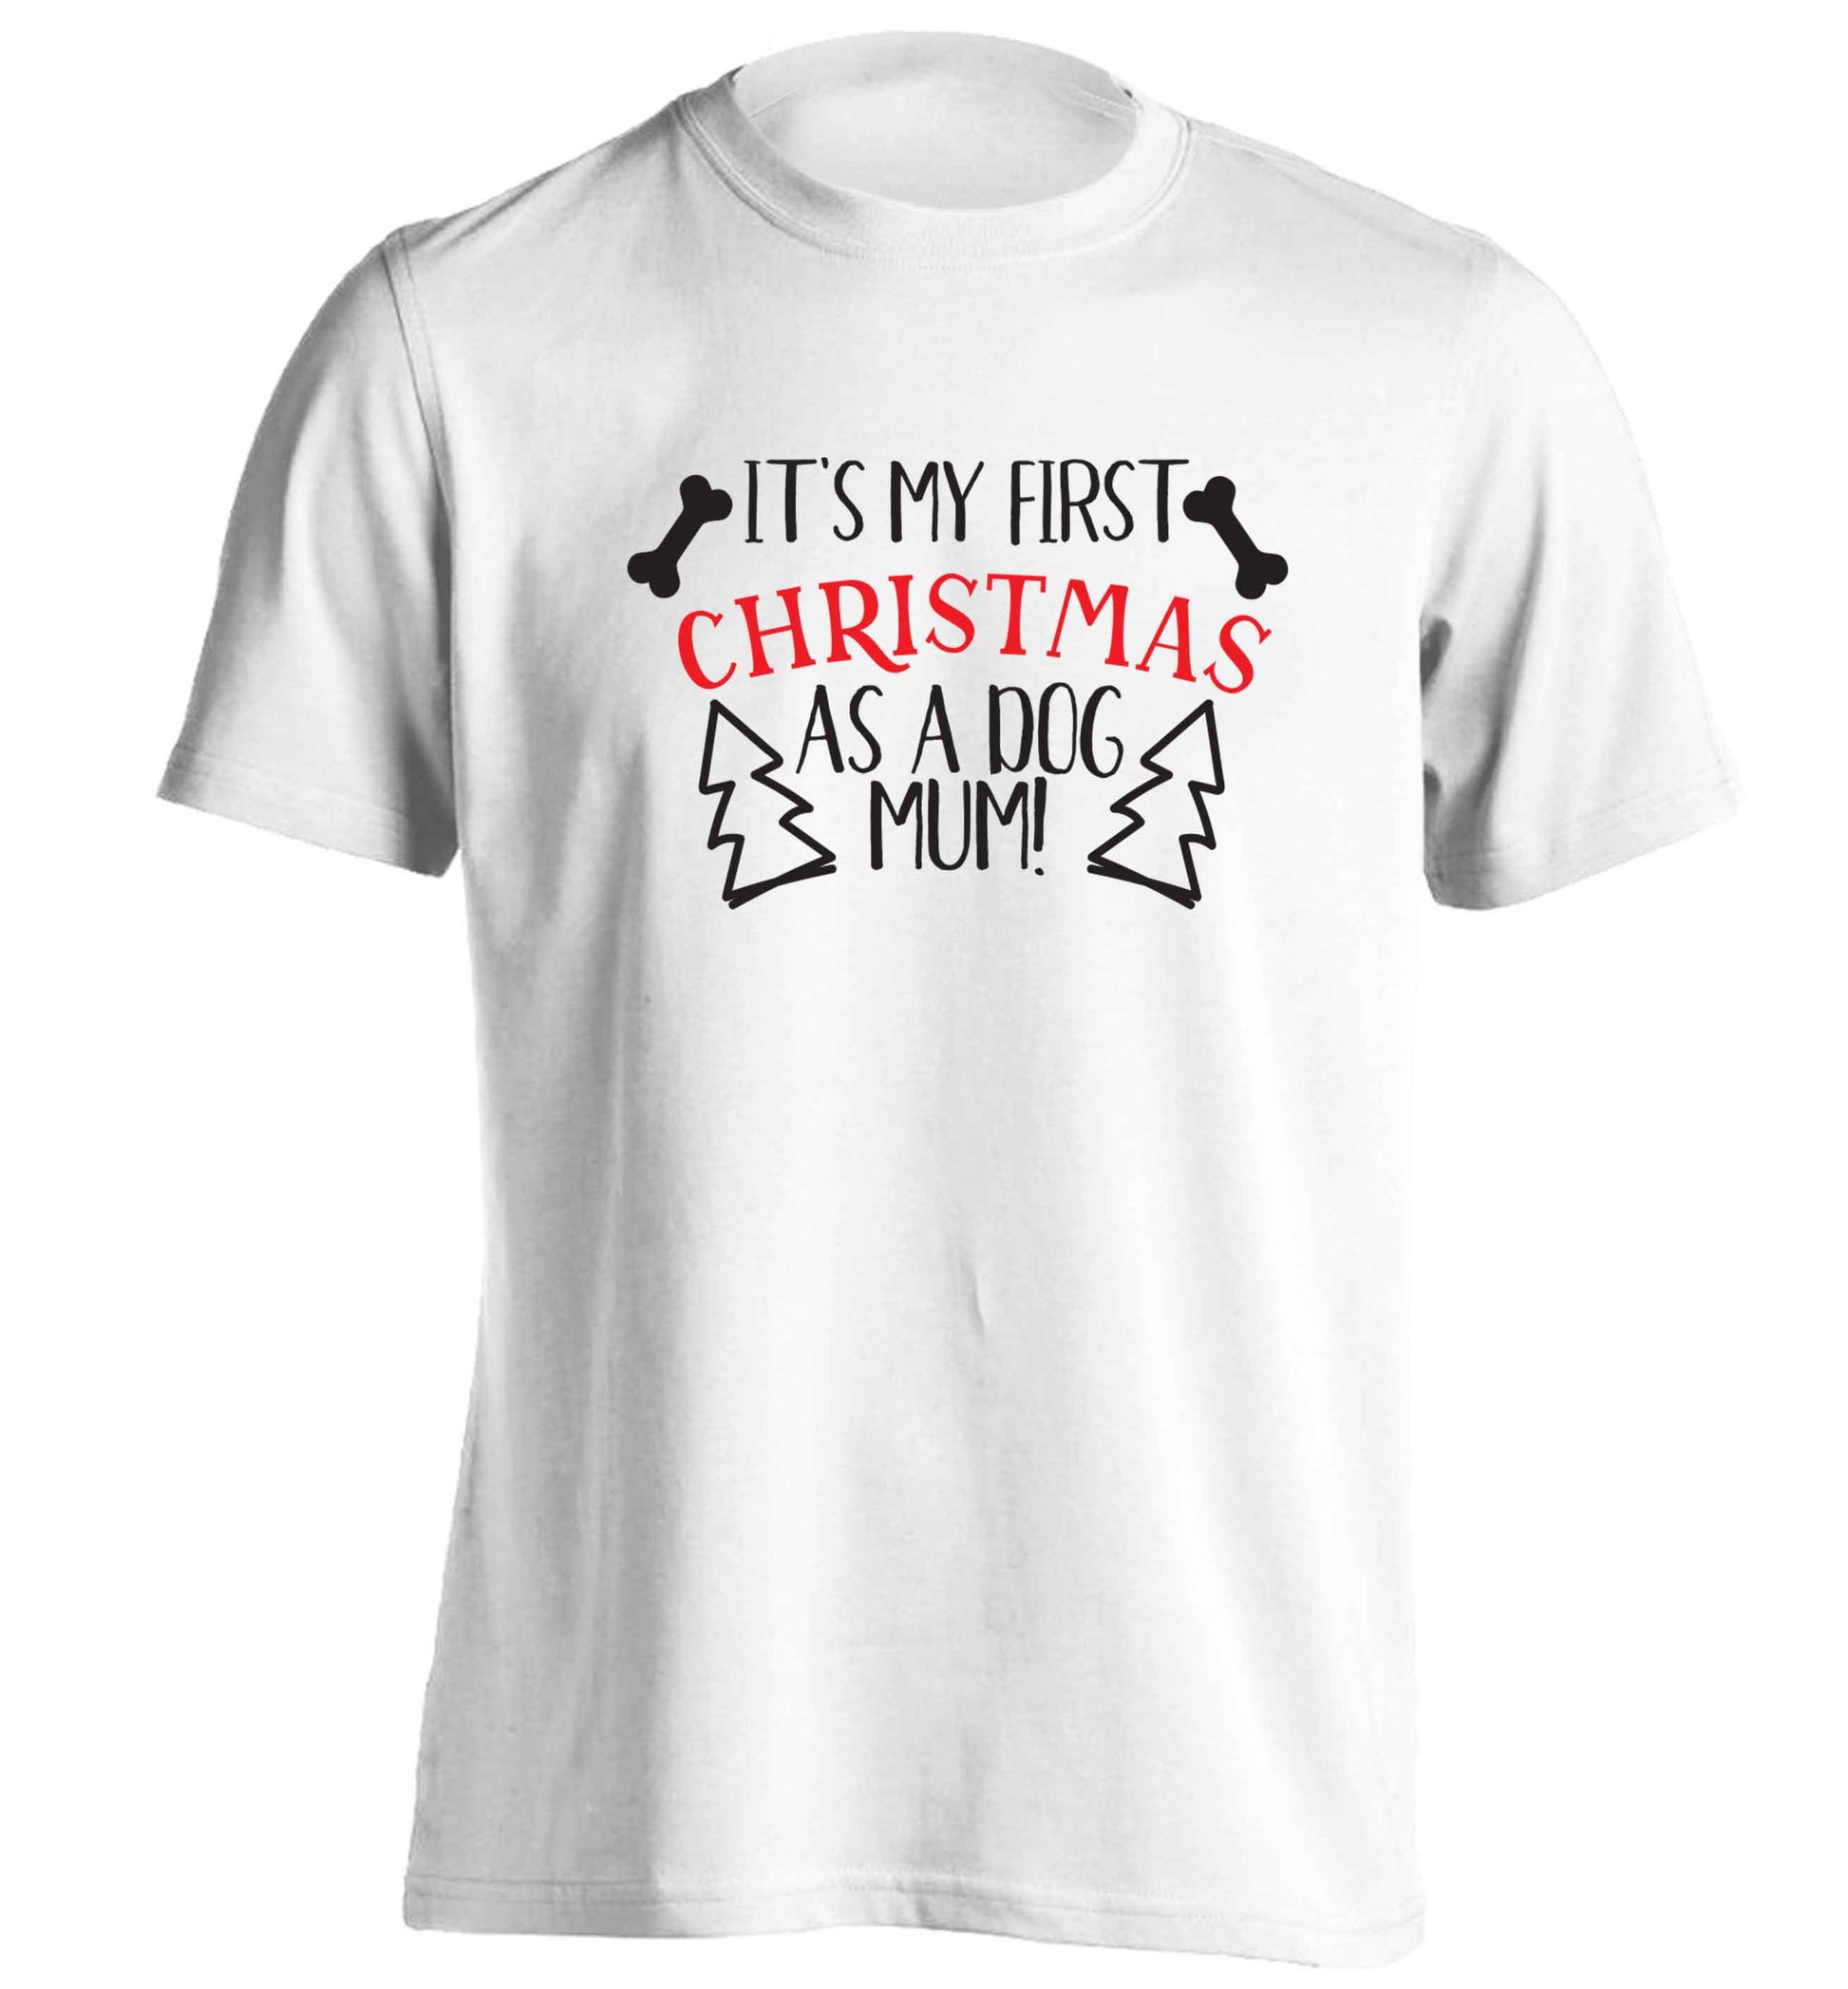 It's my first Christmas as a dog mum! adults unisex white Tshirt 2XL